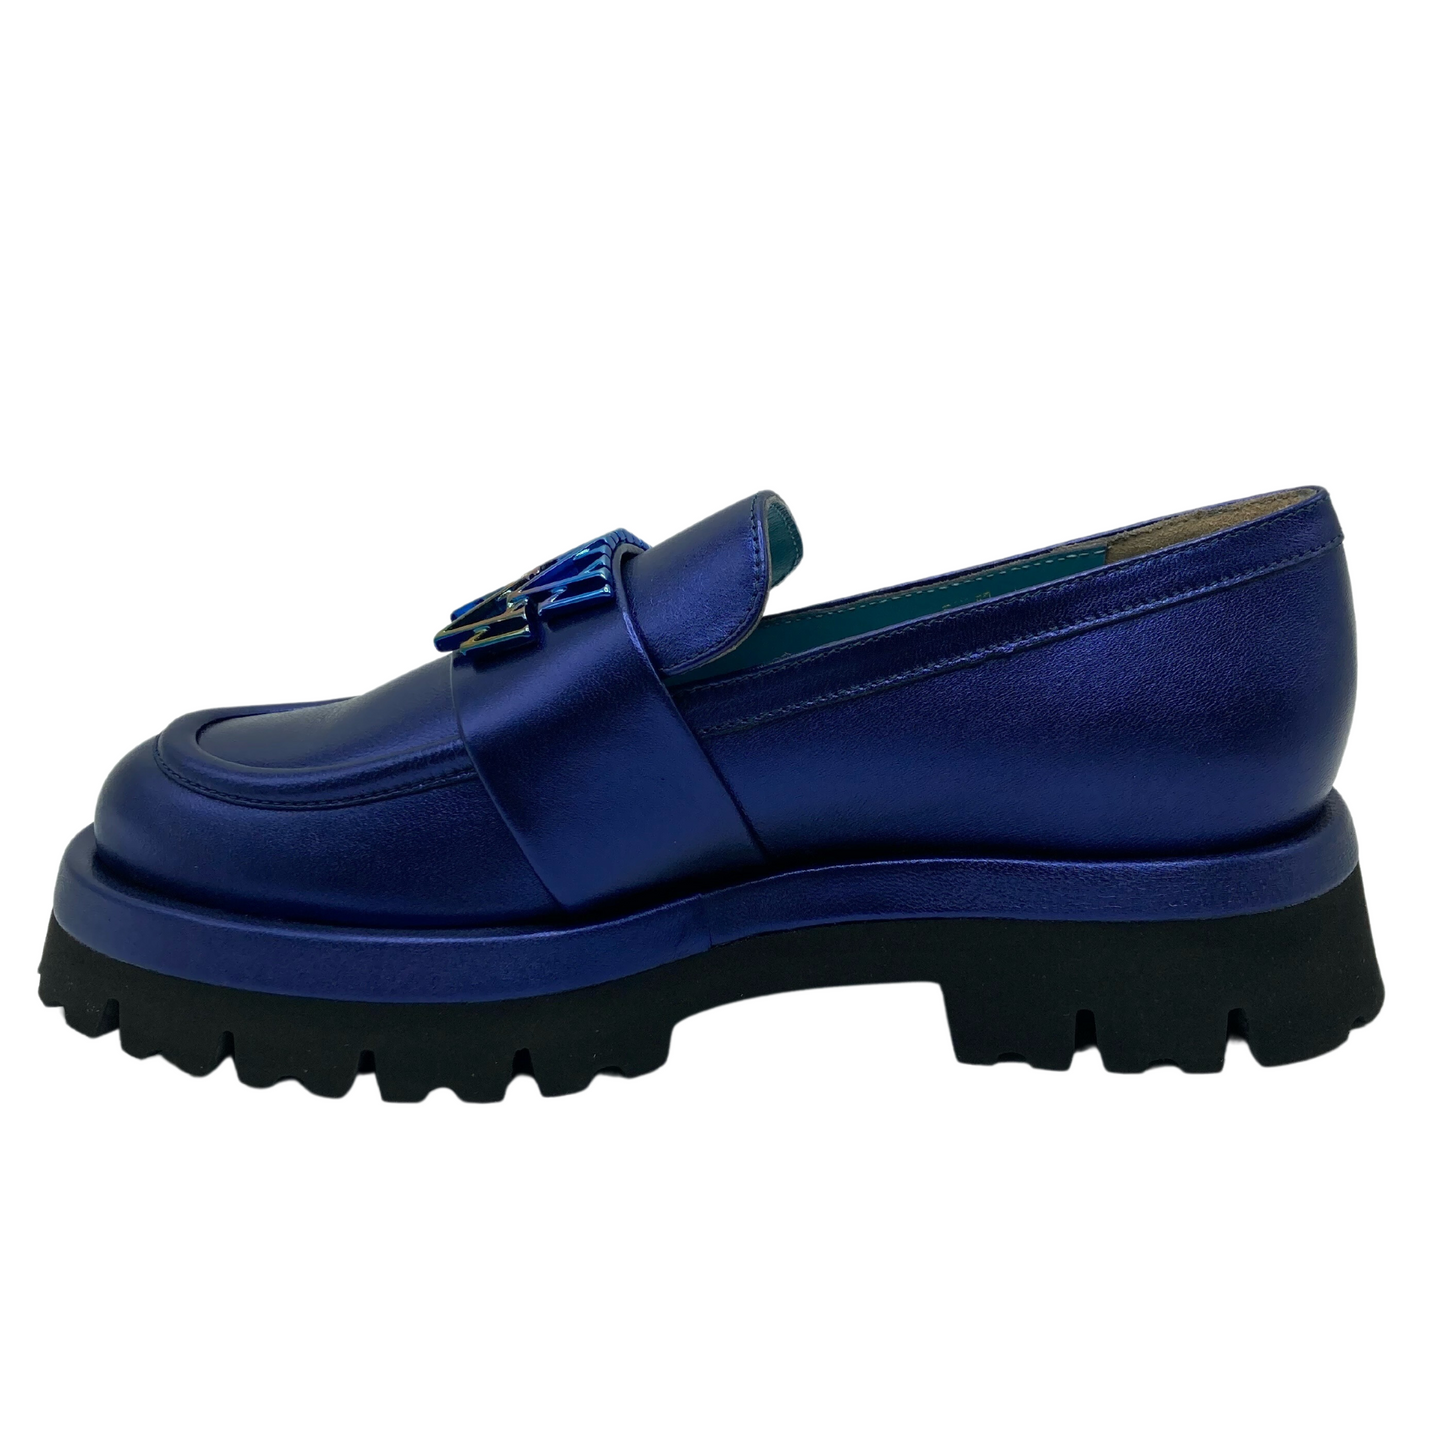 Left facing view of blue leather loafer with rubber lugged sole